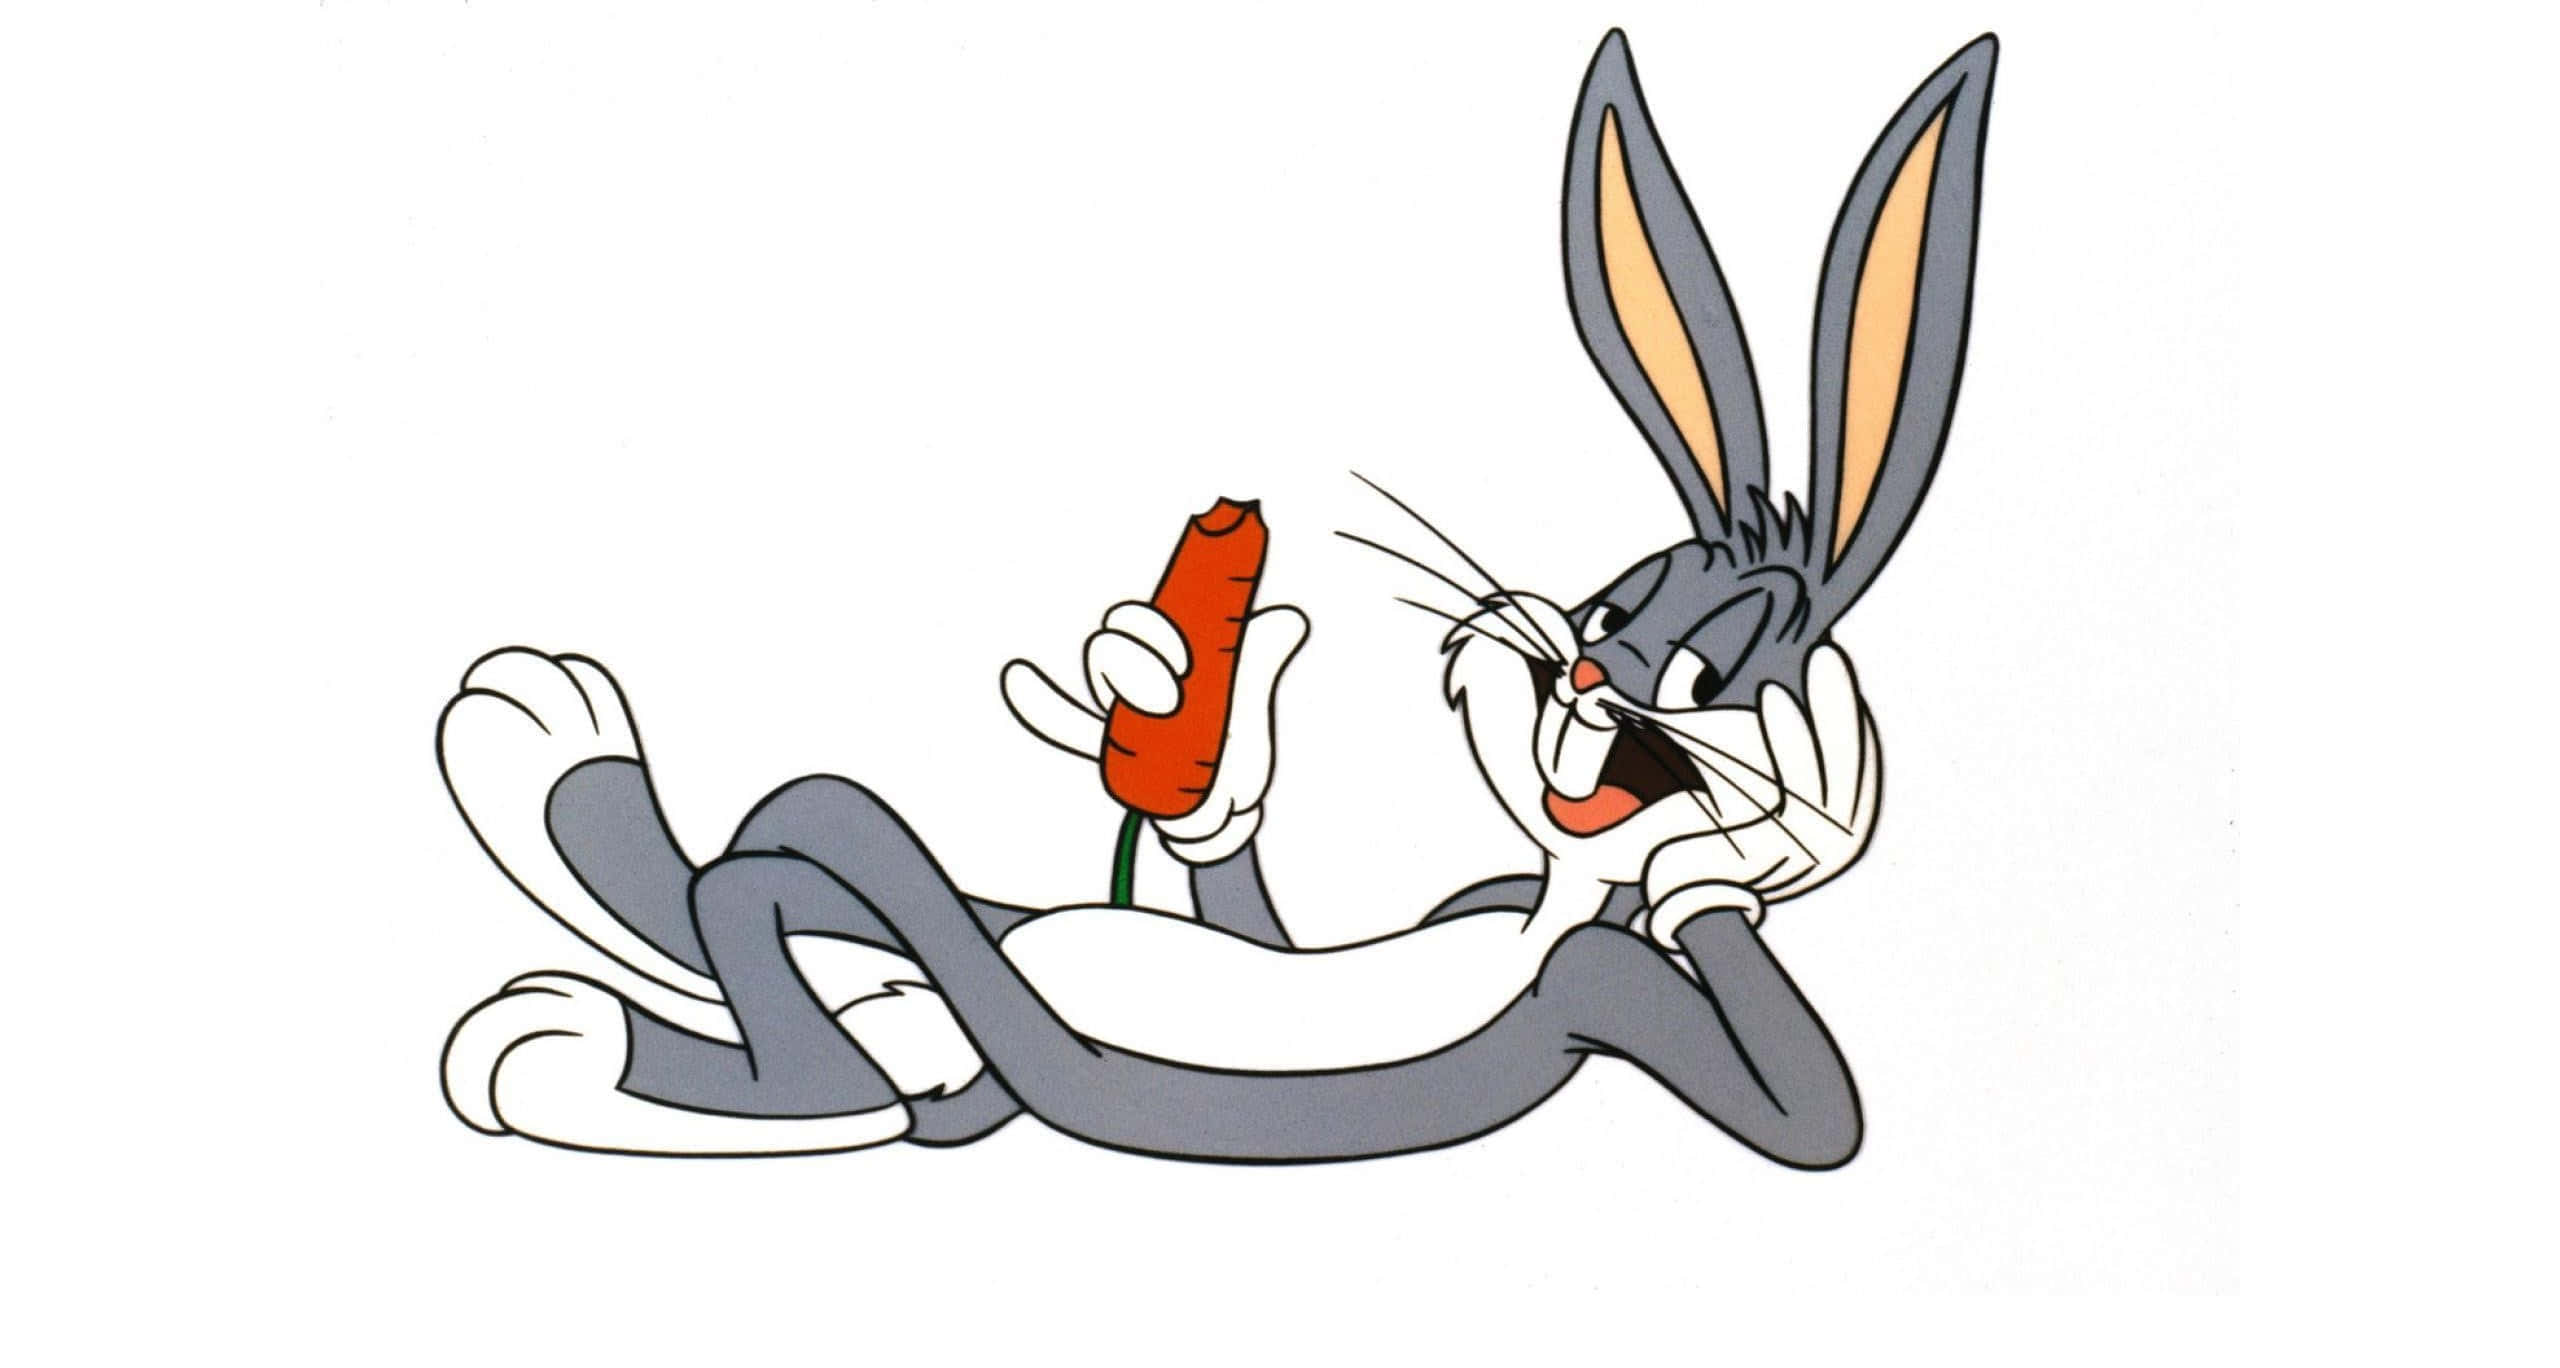 Join Bugs Bunny for an Adventure in the Universe of Laughter